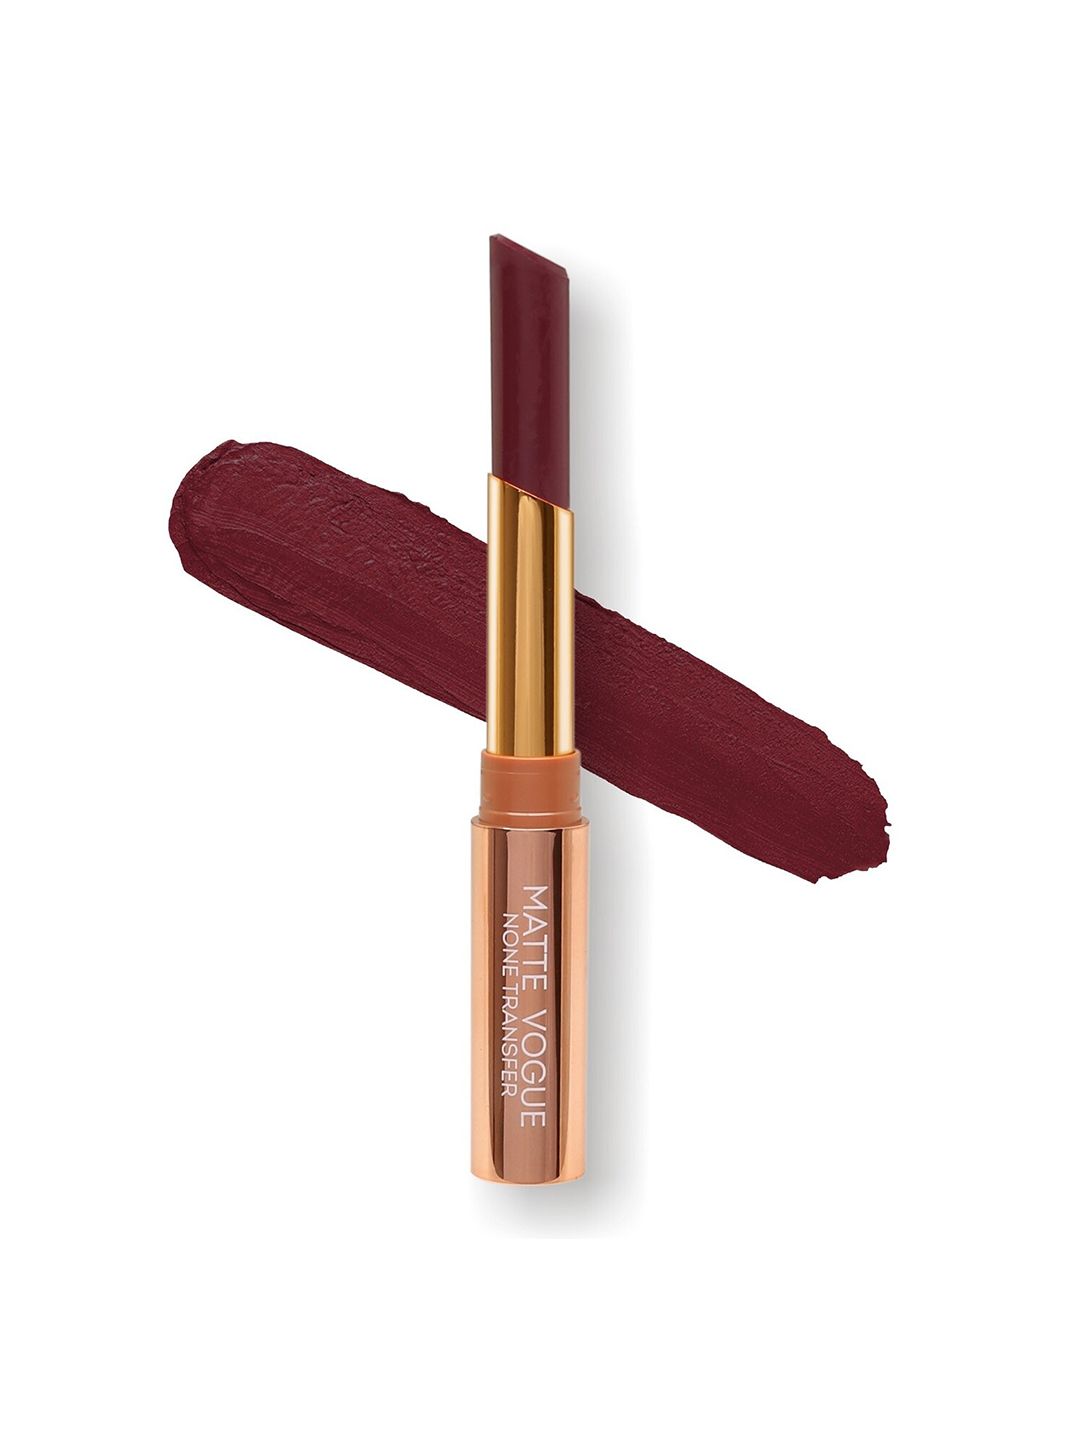 ME-ON Matte Vogue Lipstick Shade 11 - Wine Price in India